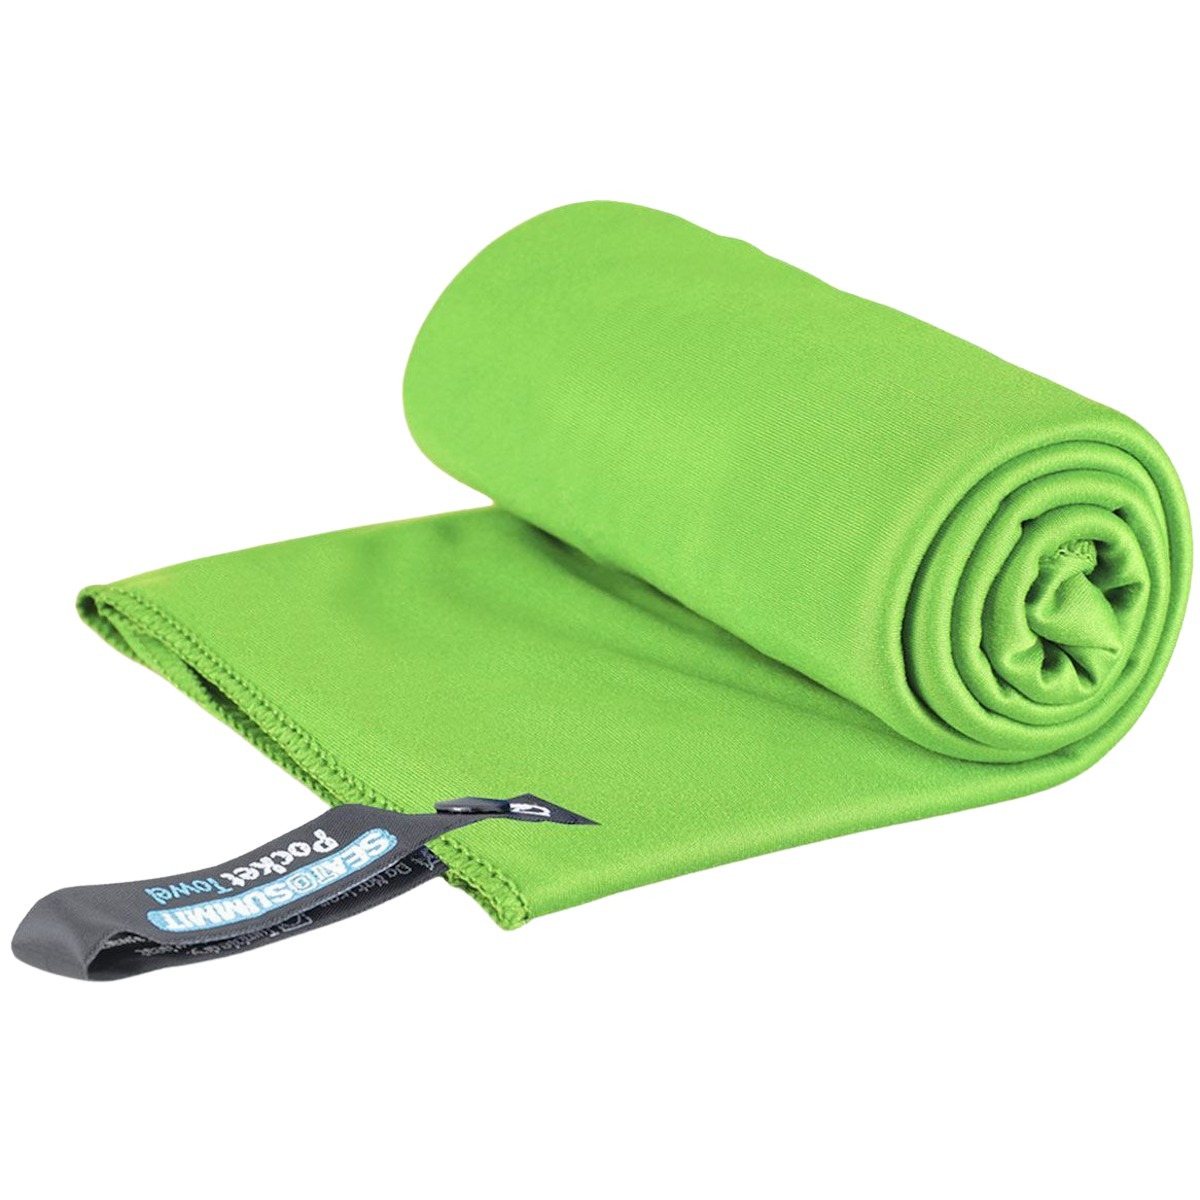 Bring microfiber towels — they’re super absorbent and lightweight.